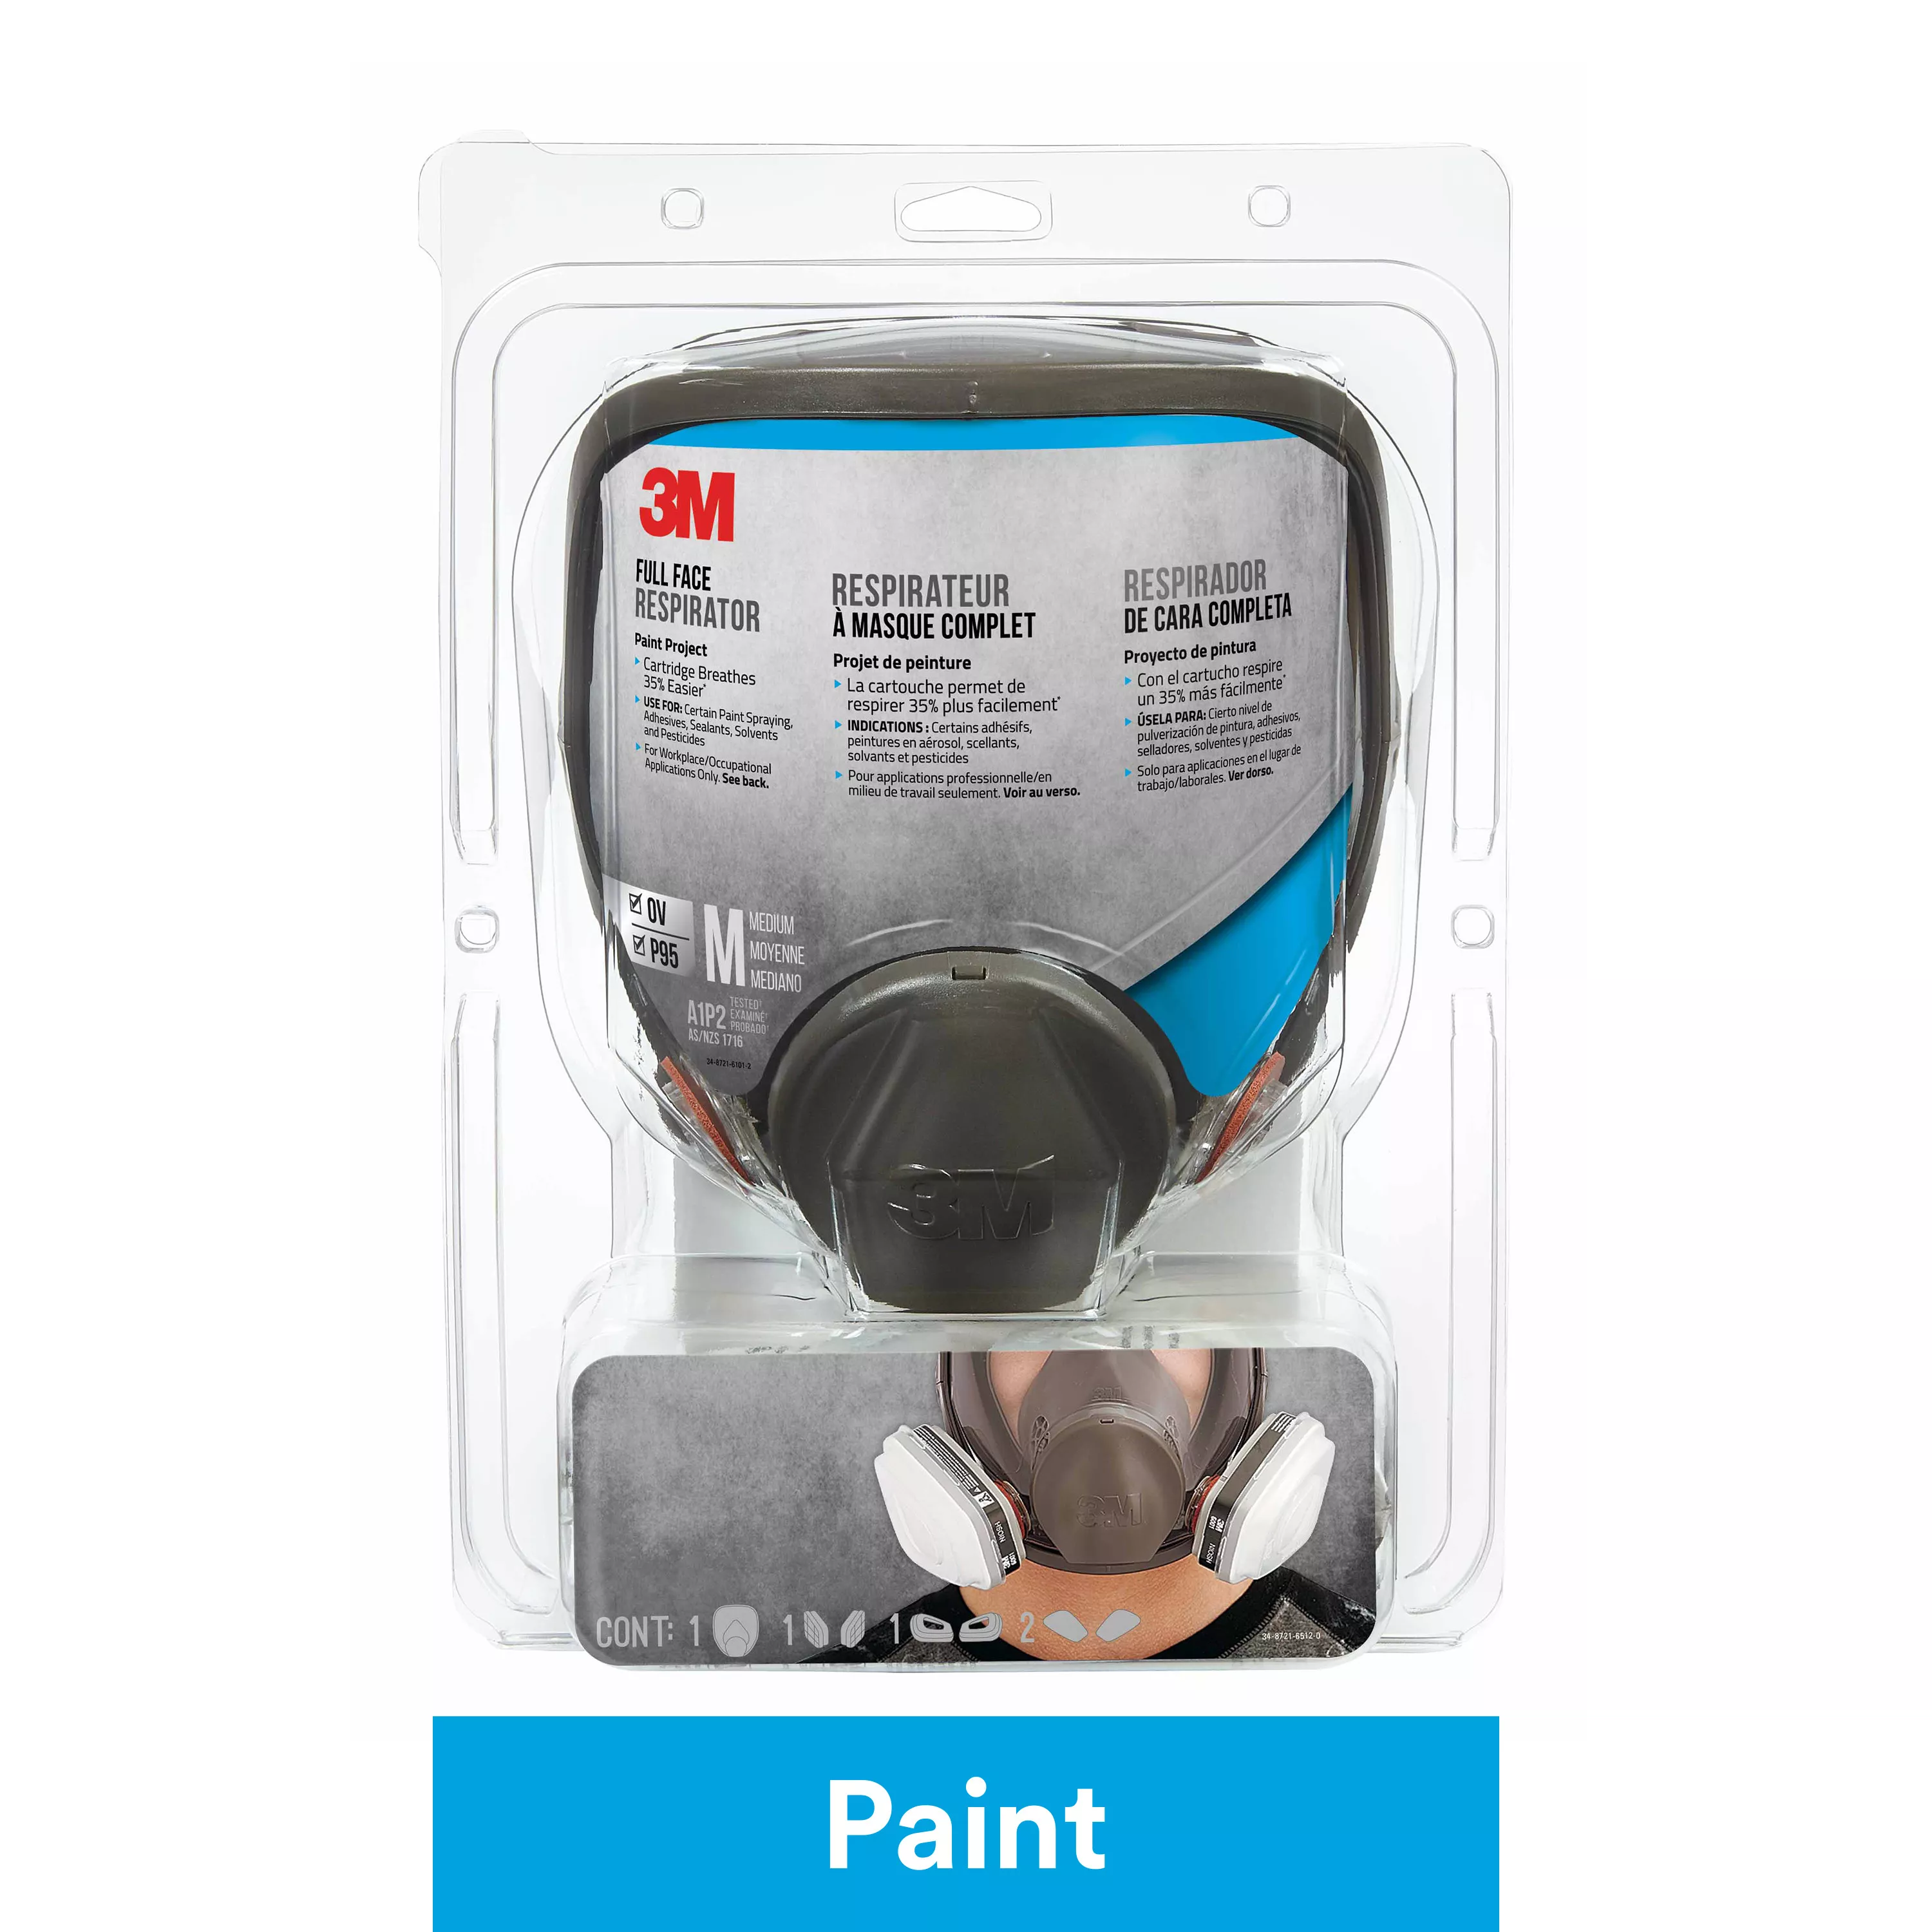 3M™ Full Face Paint Project Respirator, 68P71P1-DC, Size Medium, 1
each/pack, 2 packs/case